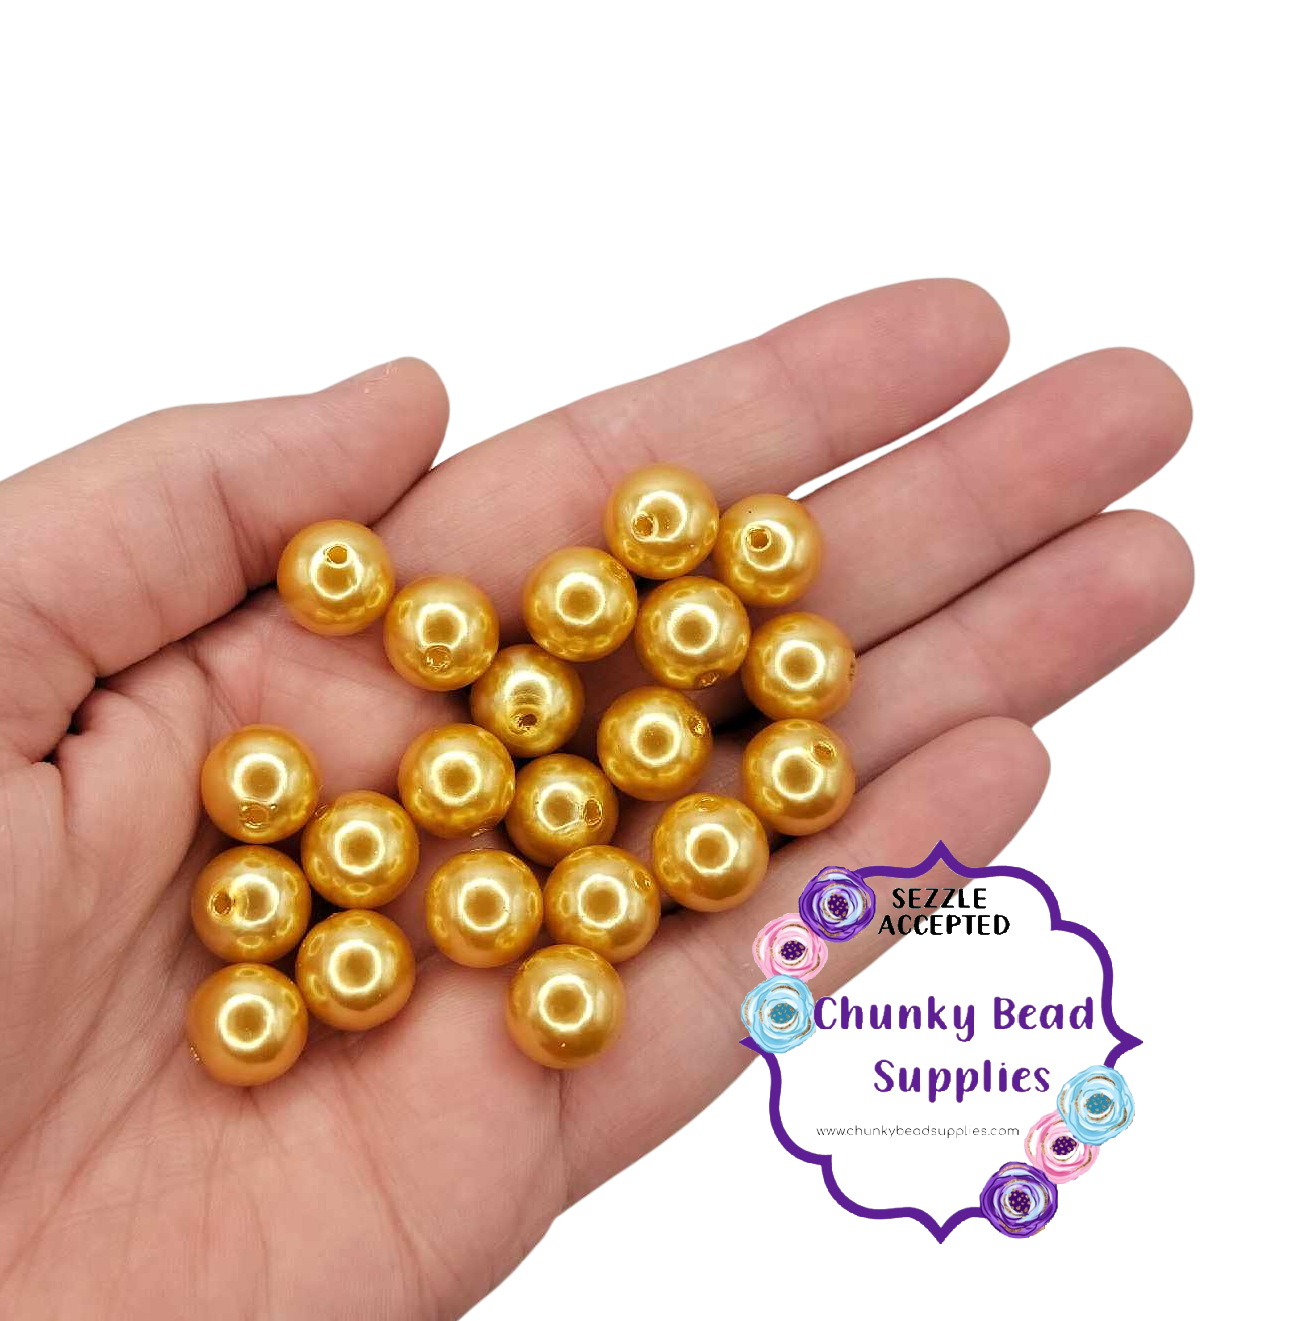 12mm “Gold” Acrylic Pearl Beads